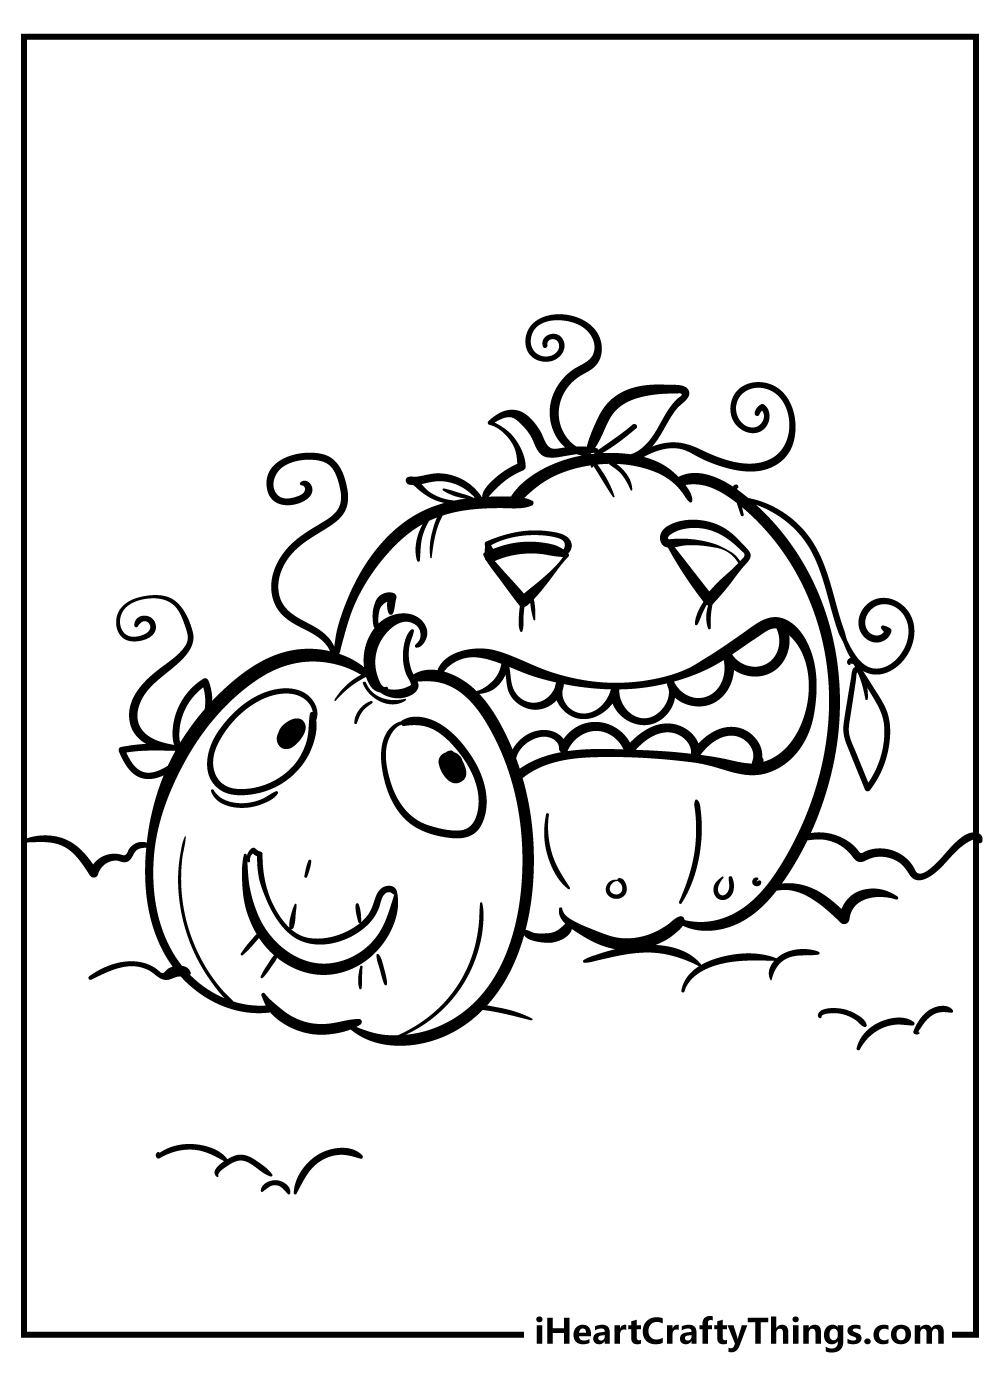 Pumpkin coloring pages free printable